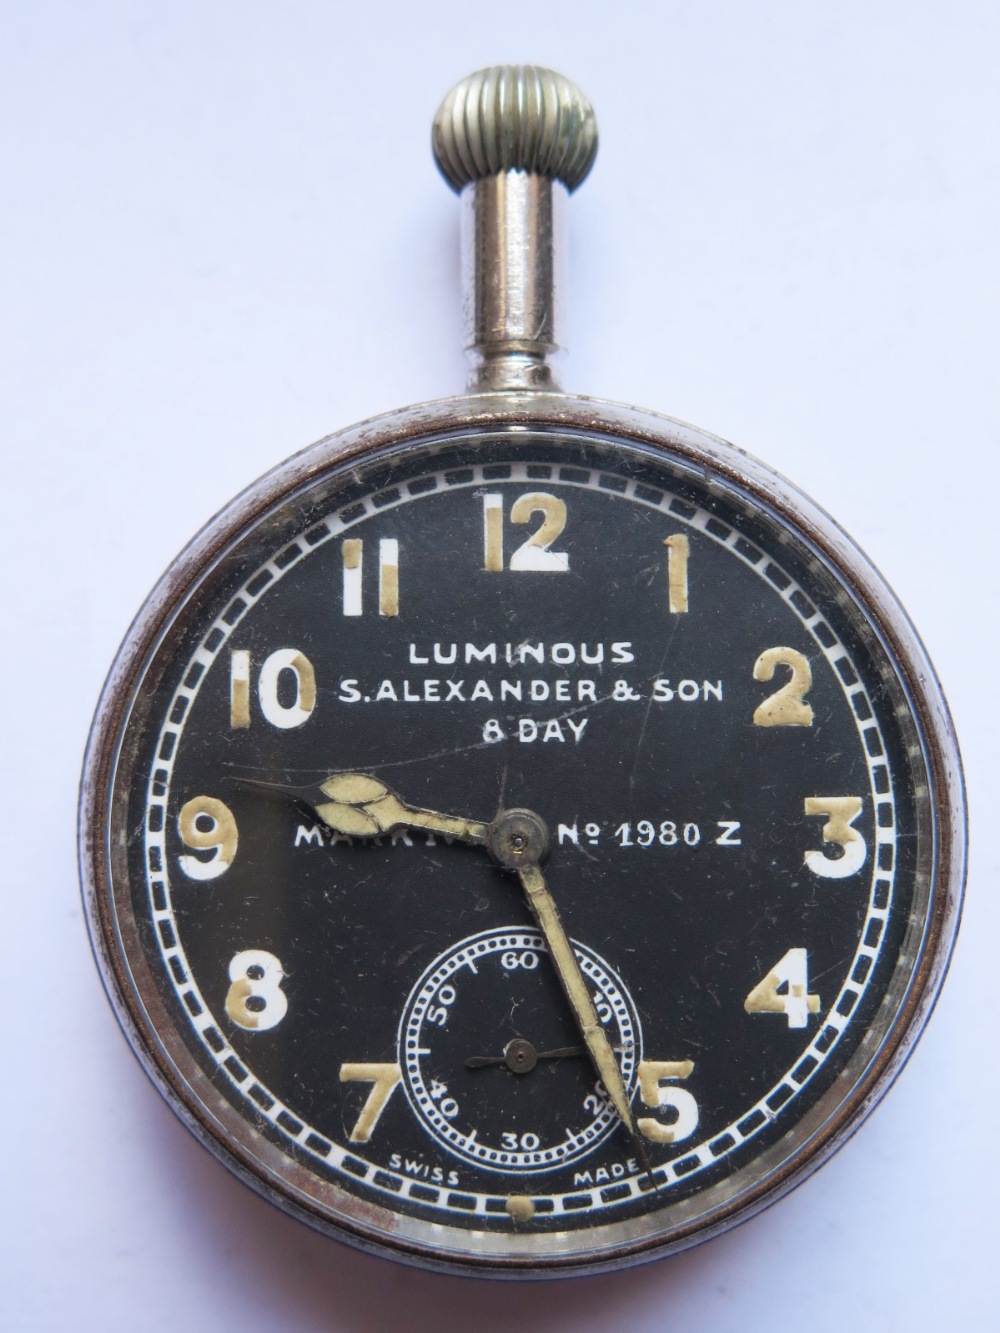 A WWII Bomber Navigation Pocket Watch by S. Alexander & Son, 8 day movement, Mark IV No. 19802